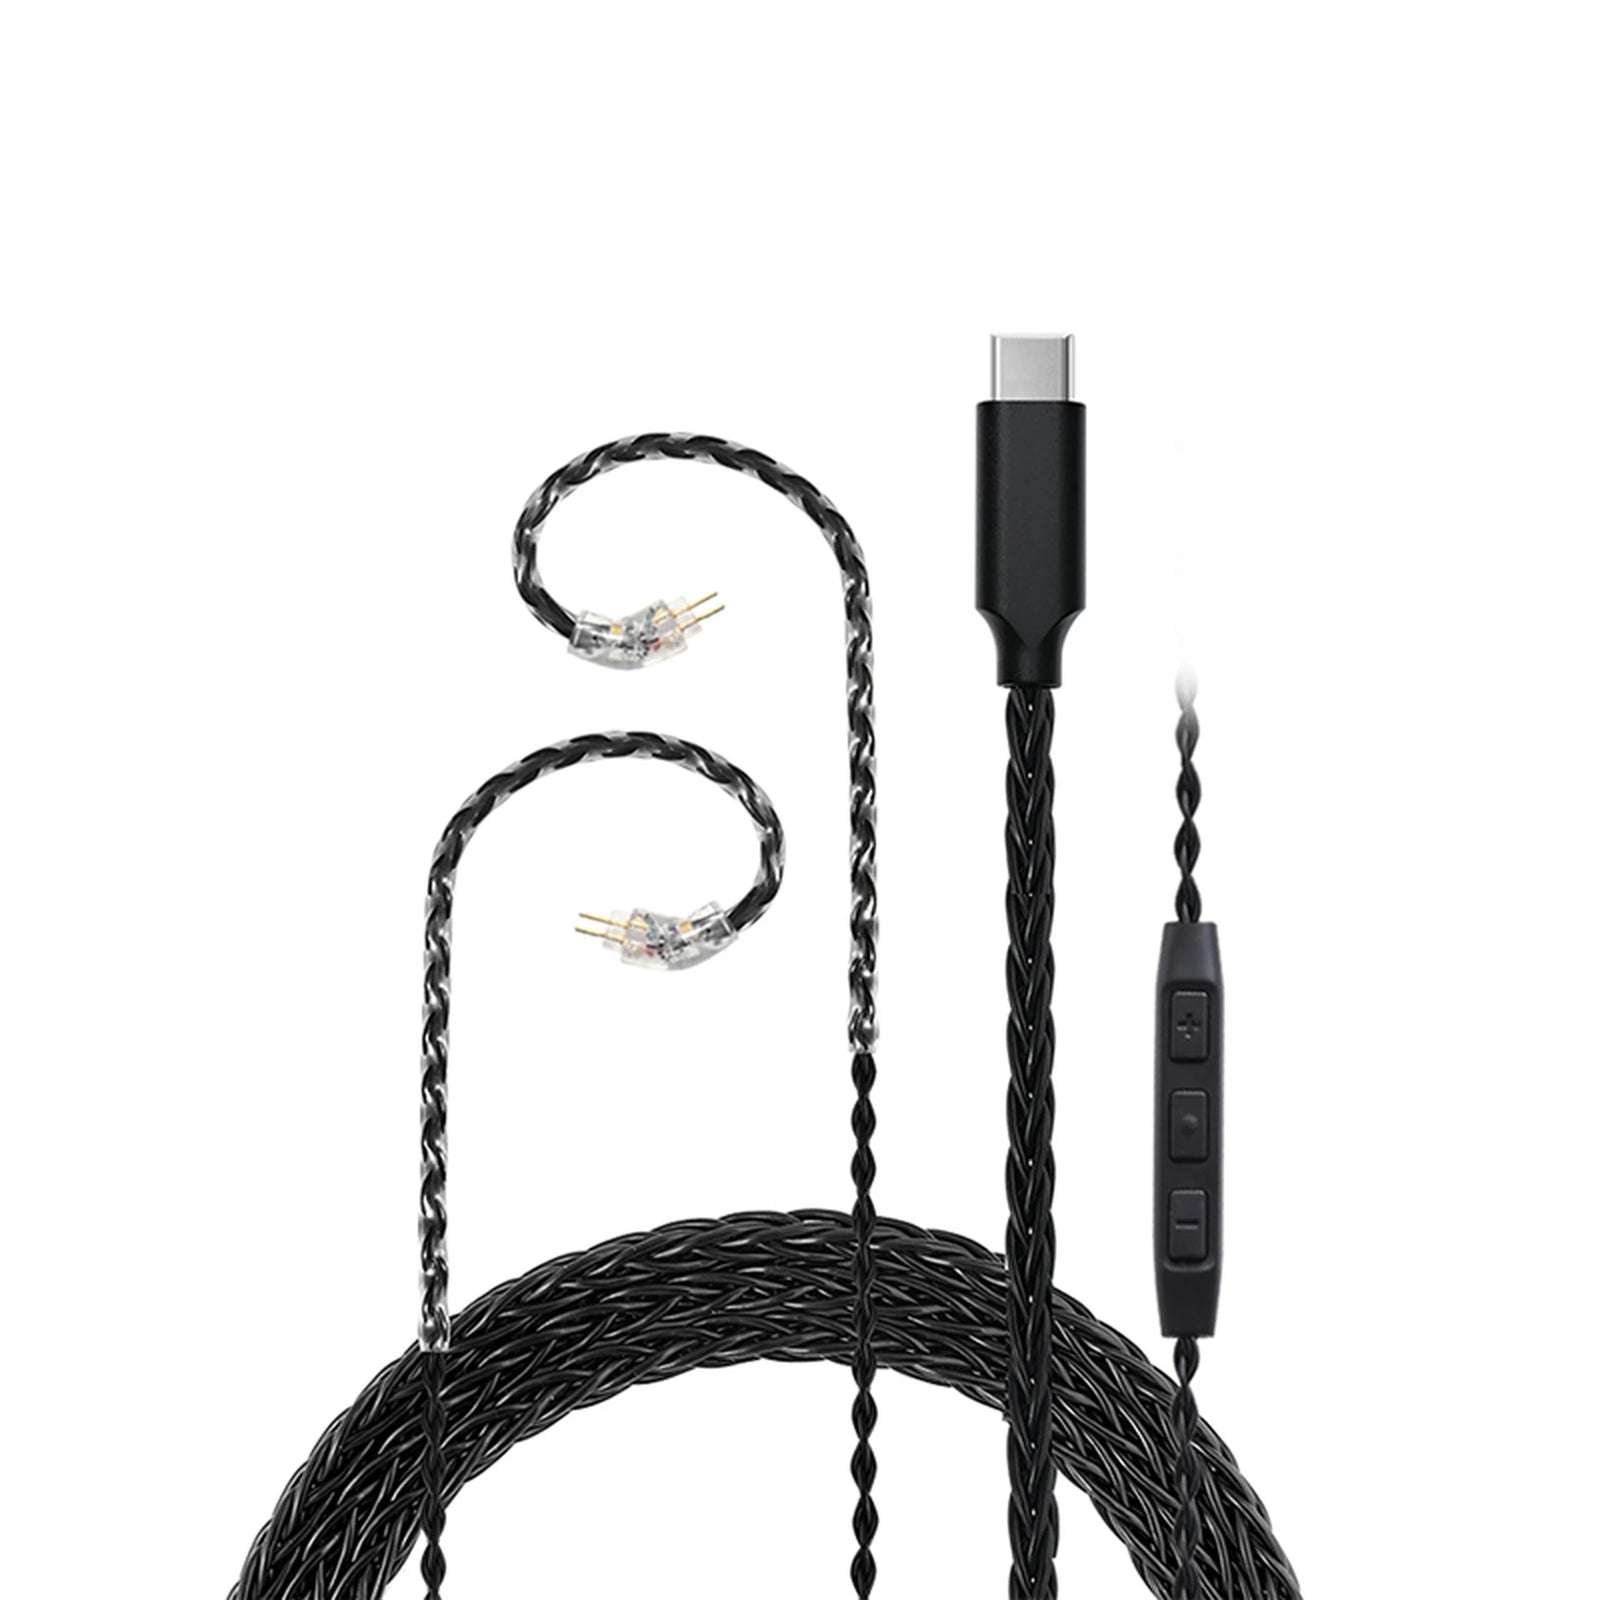 Jcally TC08 Pro 8 Core TYPE-C Earphone Upgrade Cable With MIC